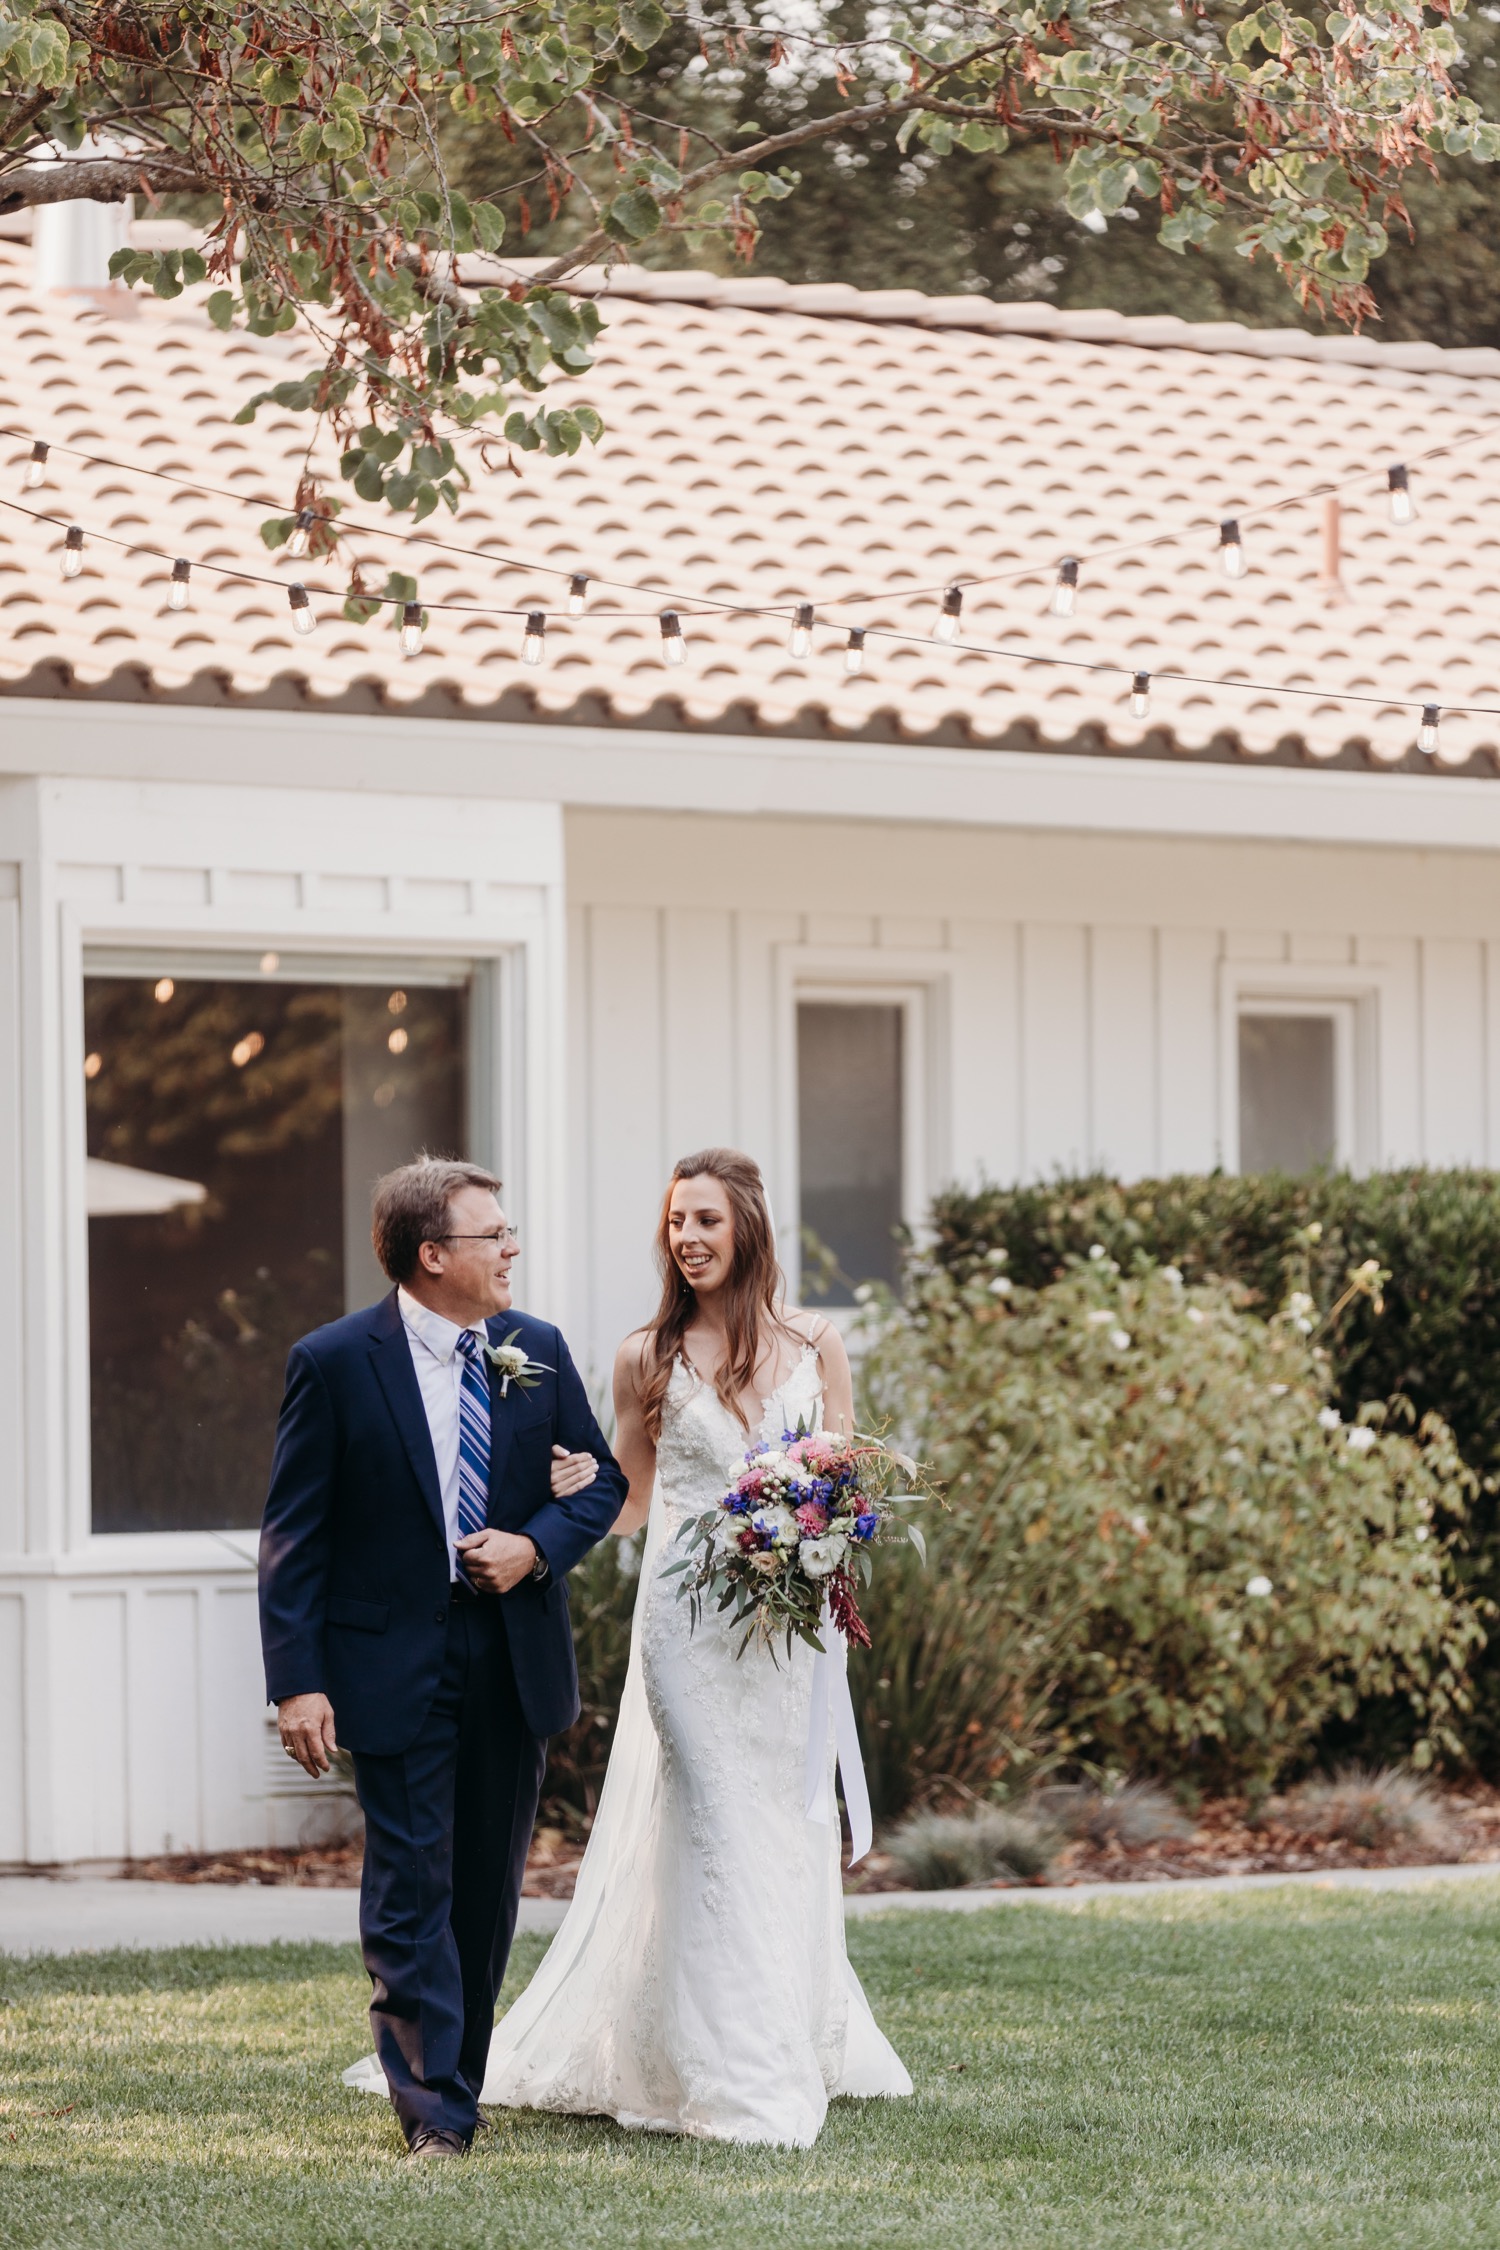 Father walks the bride down the aisle at The Maples in Woodland, CA